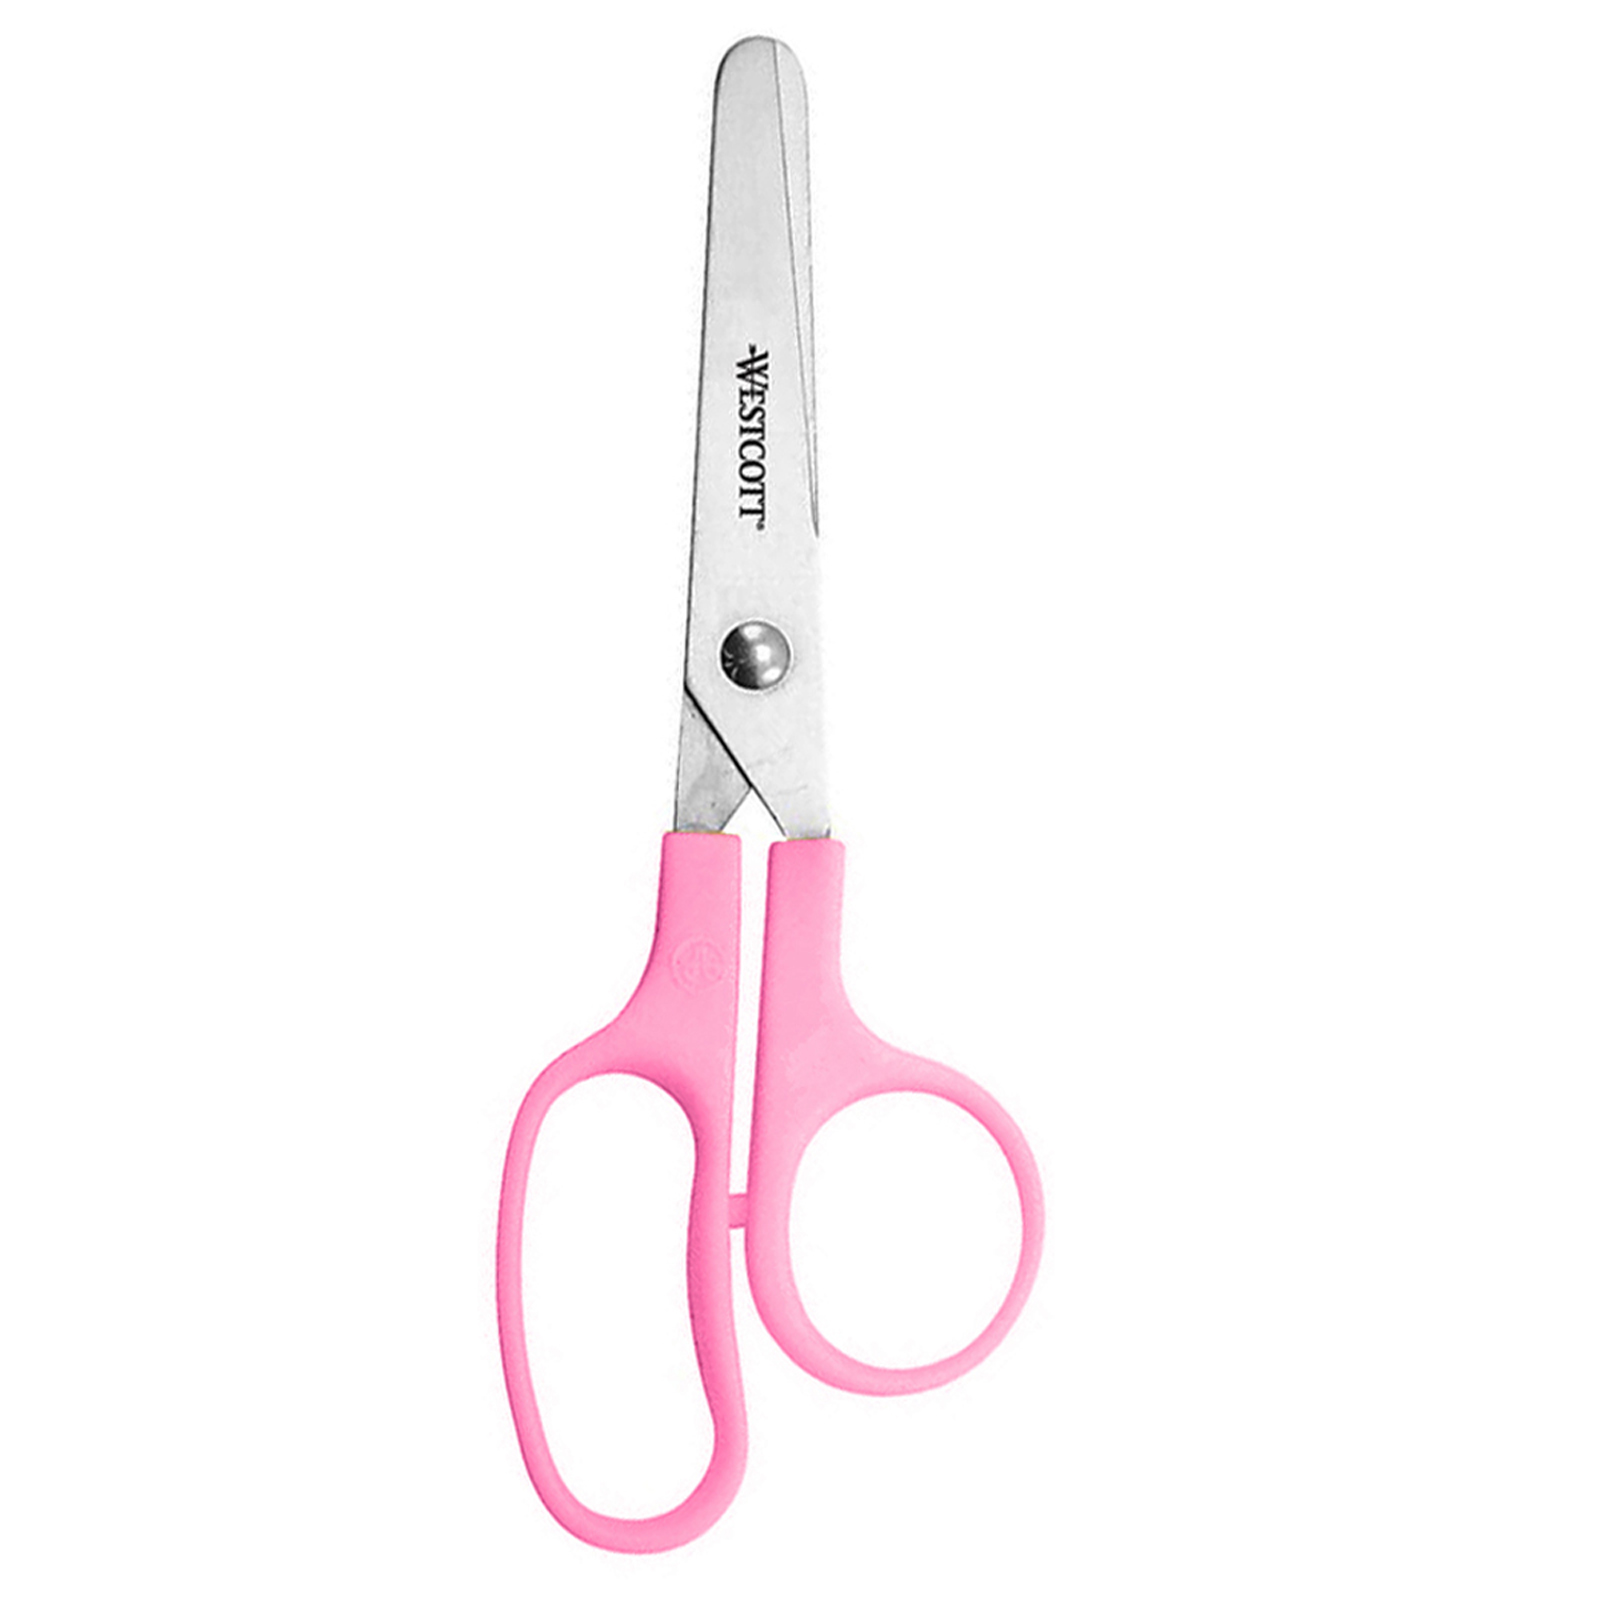 The Teachers' Lounge®  KidiCut 4.75 Spring-Assisted Plastic Safety  Scissors